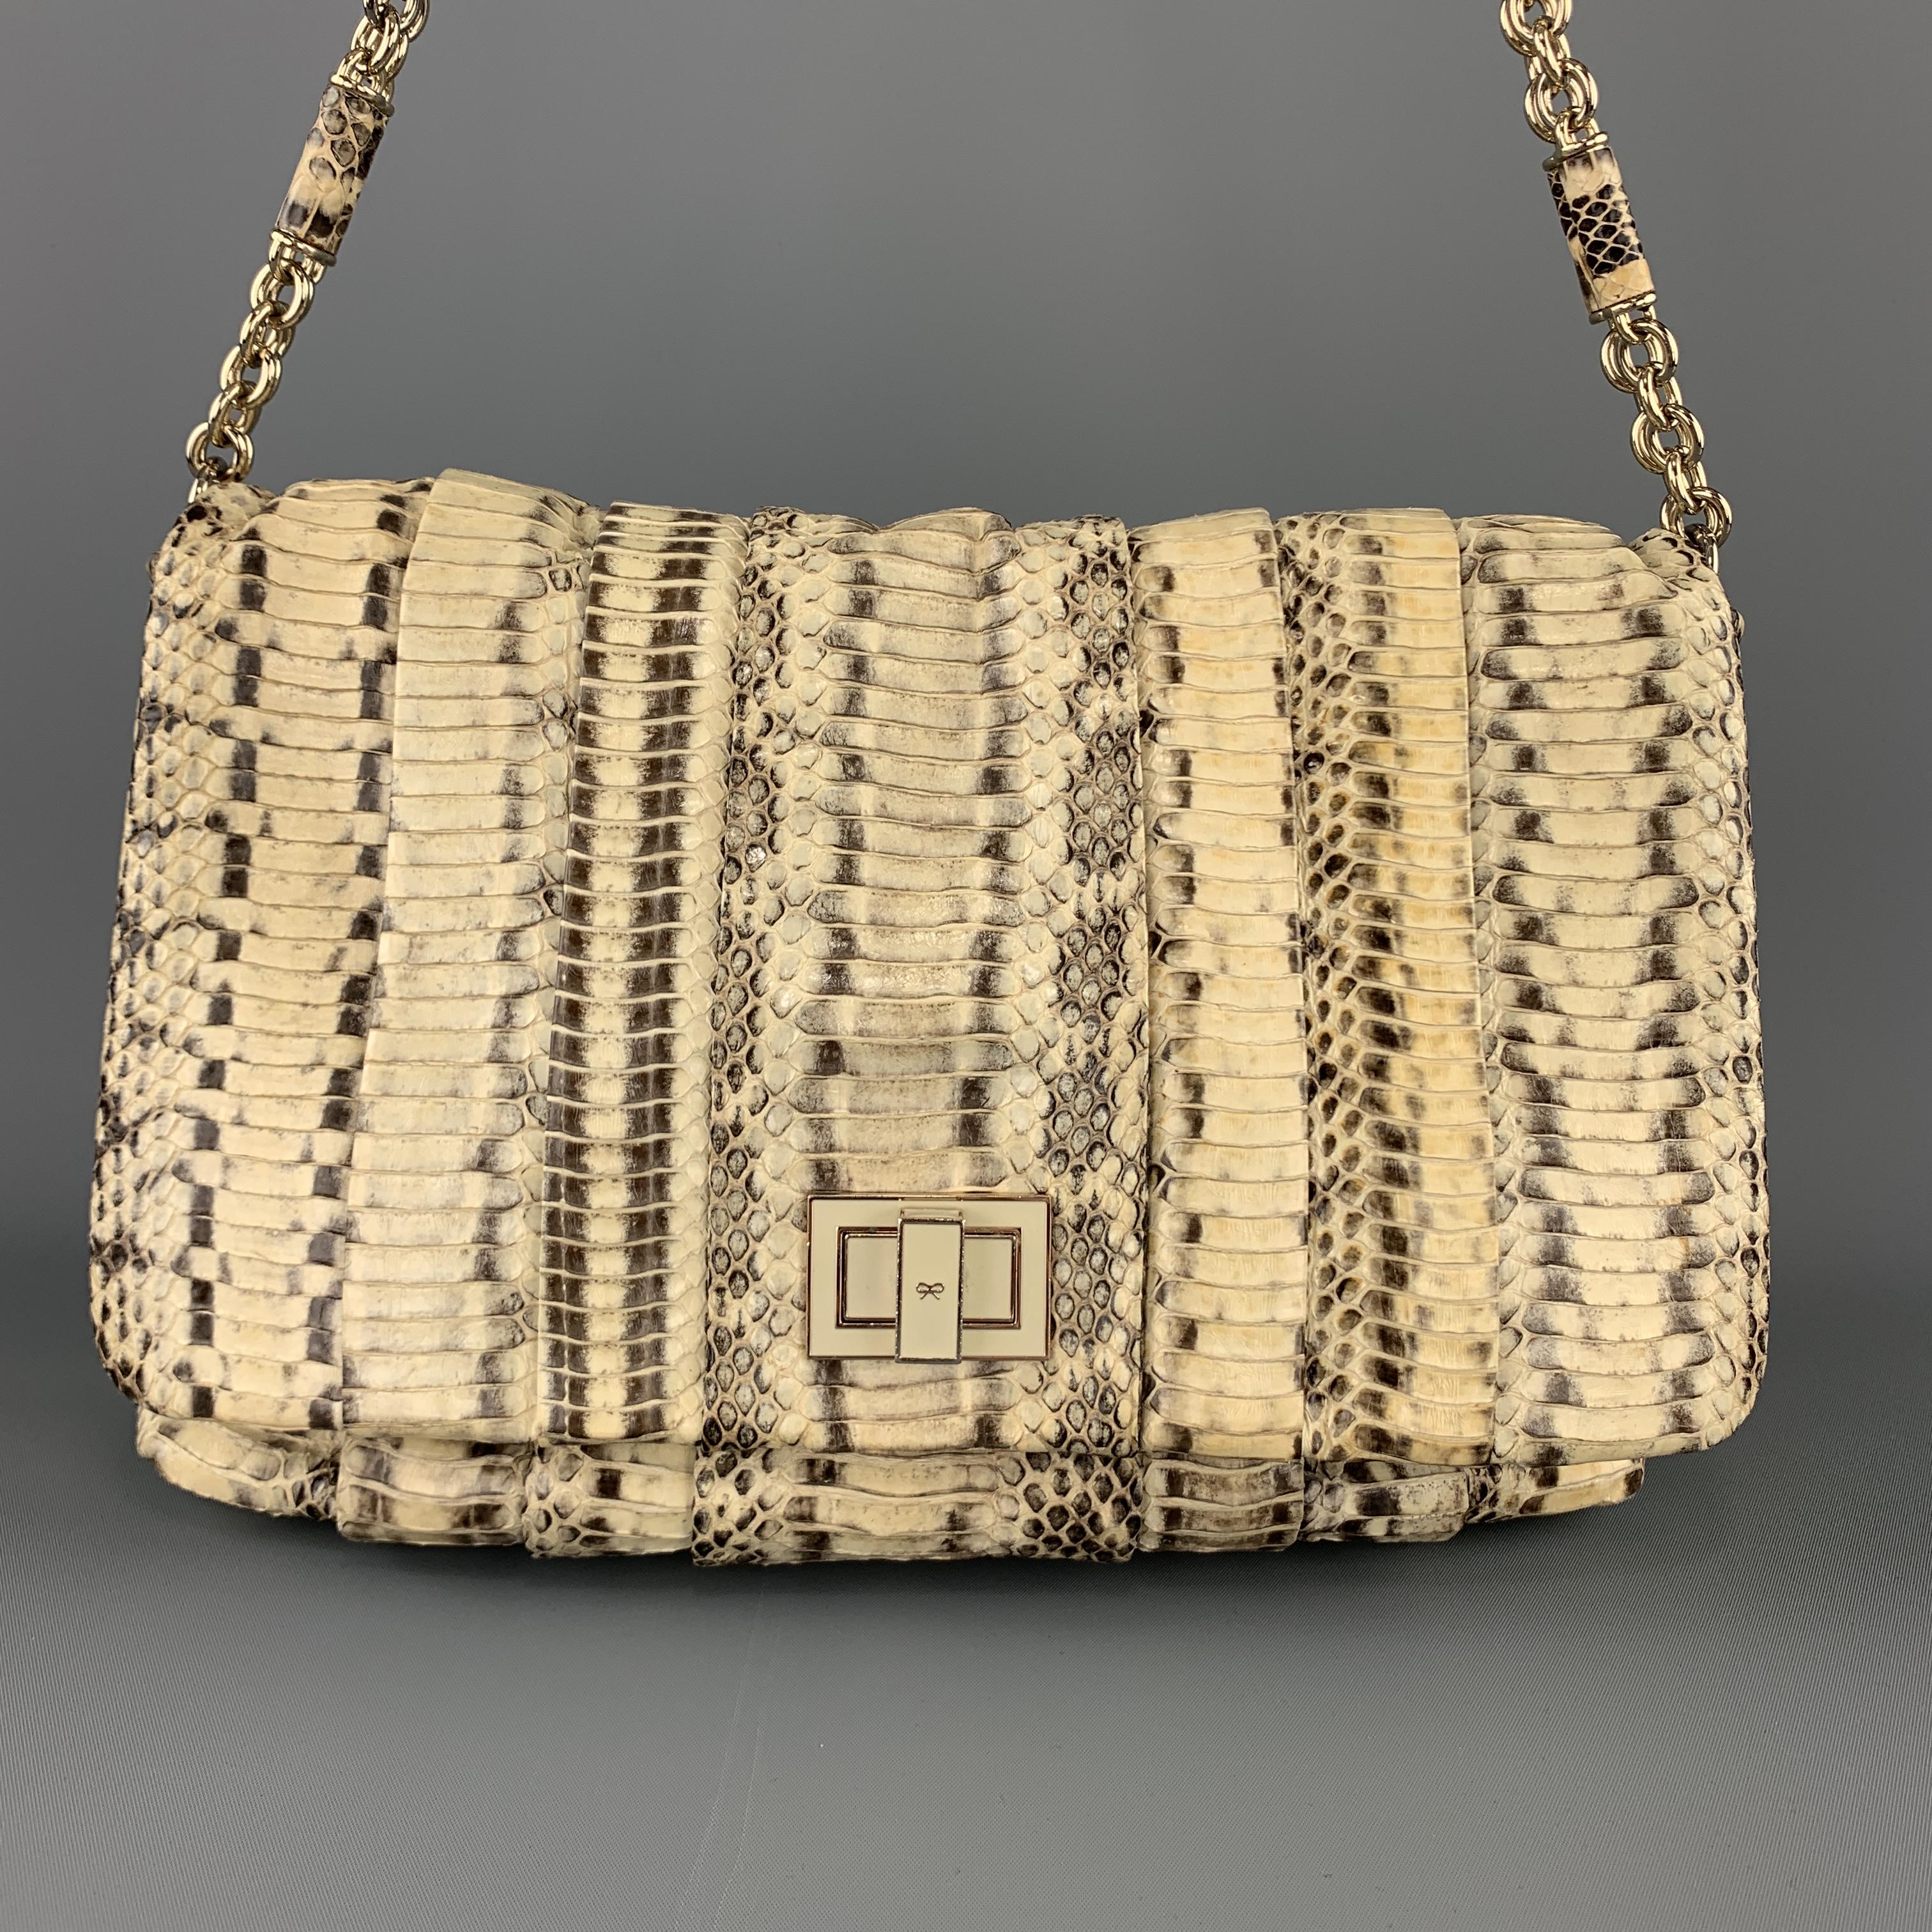 ANYA HINDMARCH shoulder bag comes in natural beige python skin leather with a pleated top flap, cream enamel turn lock closure, chain strap with leather links, and suede interior. Minor wear on liner.

Very Good Pre-Owned